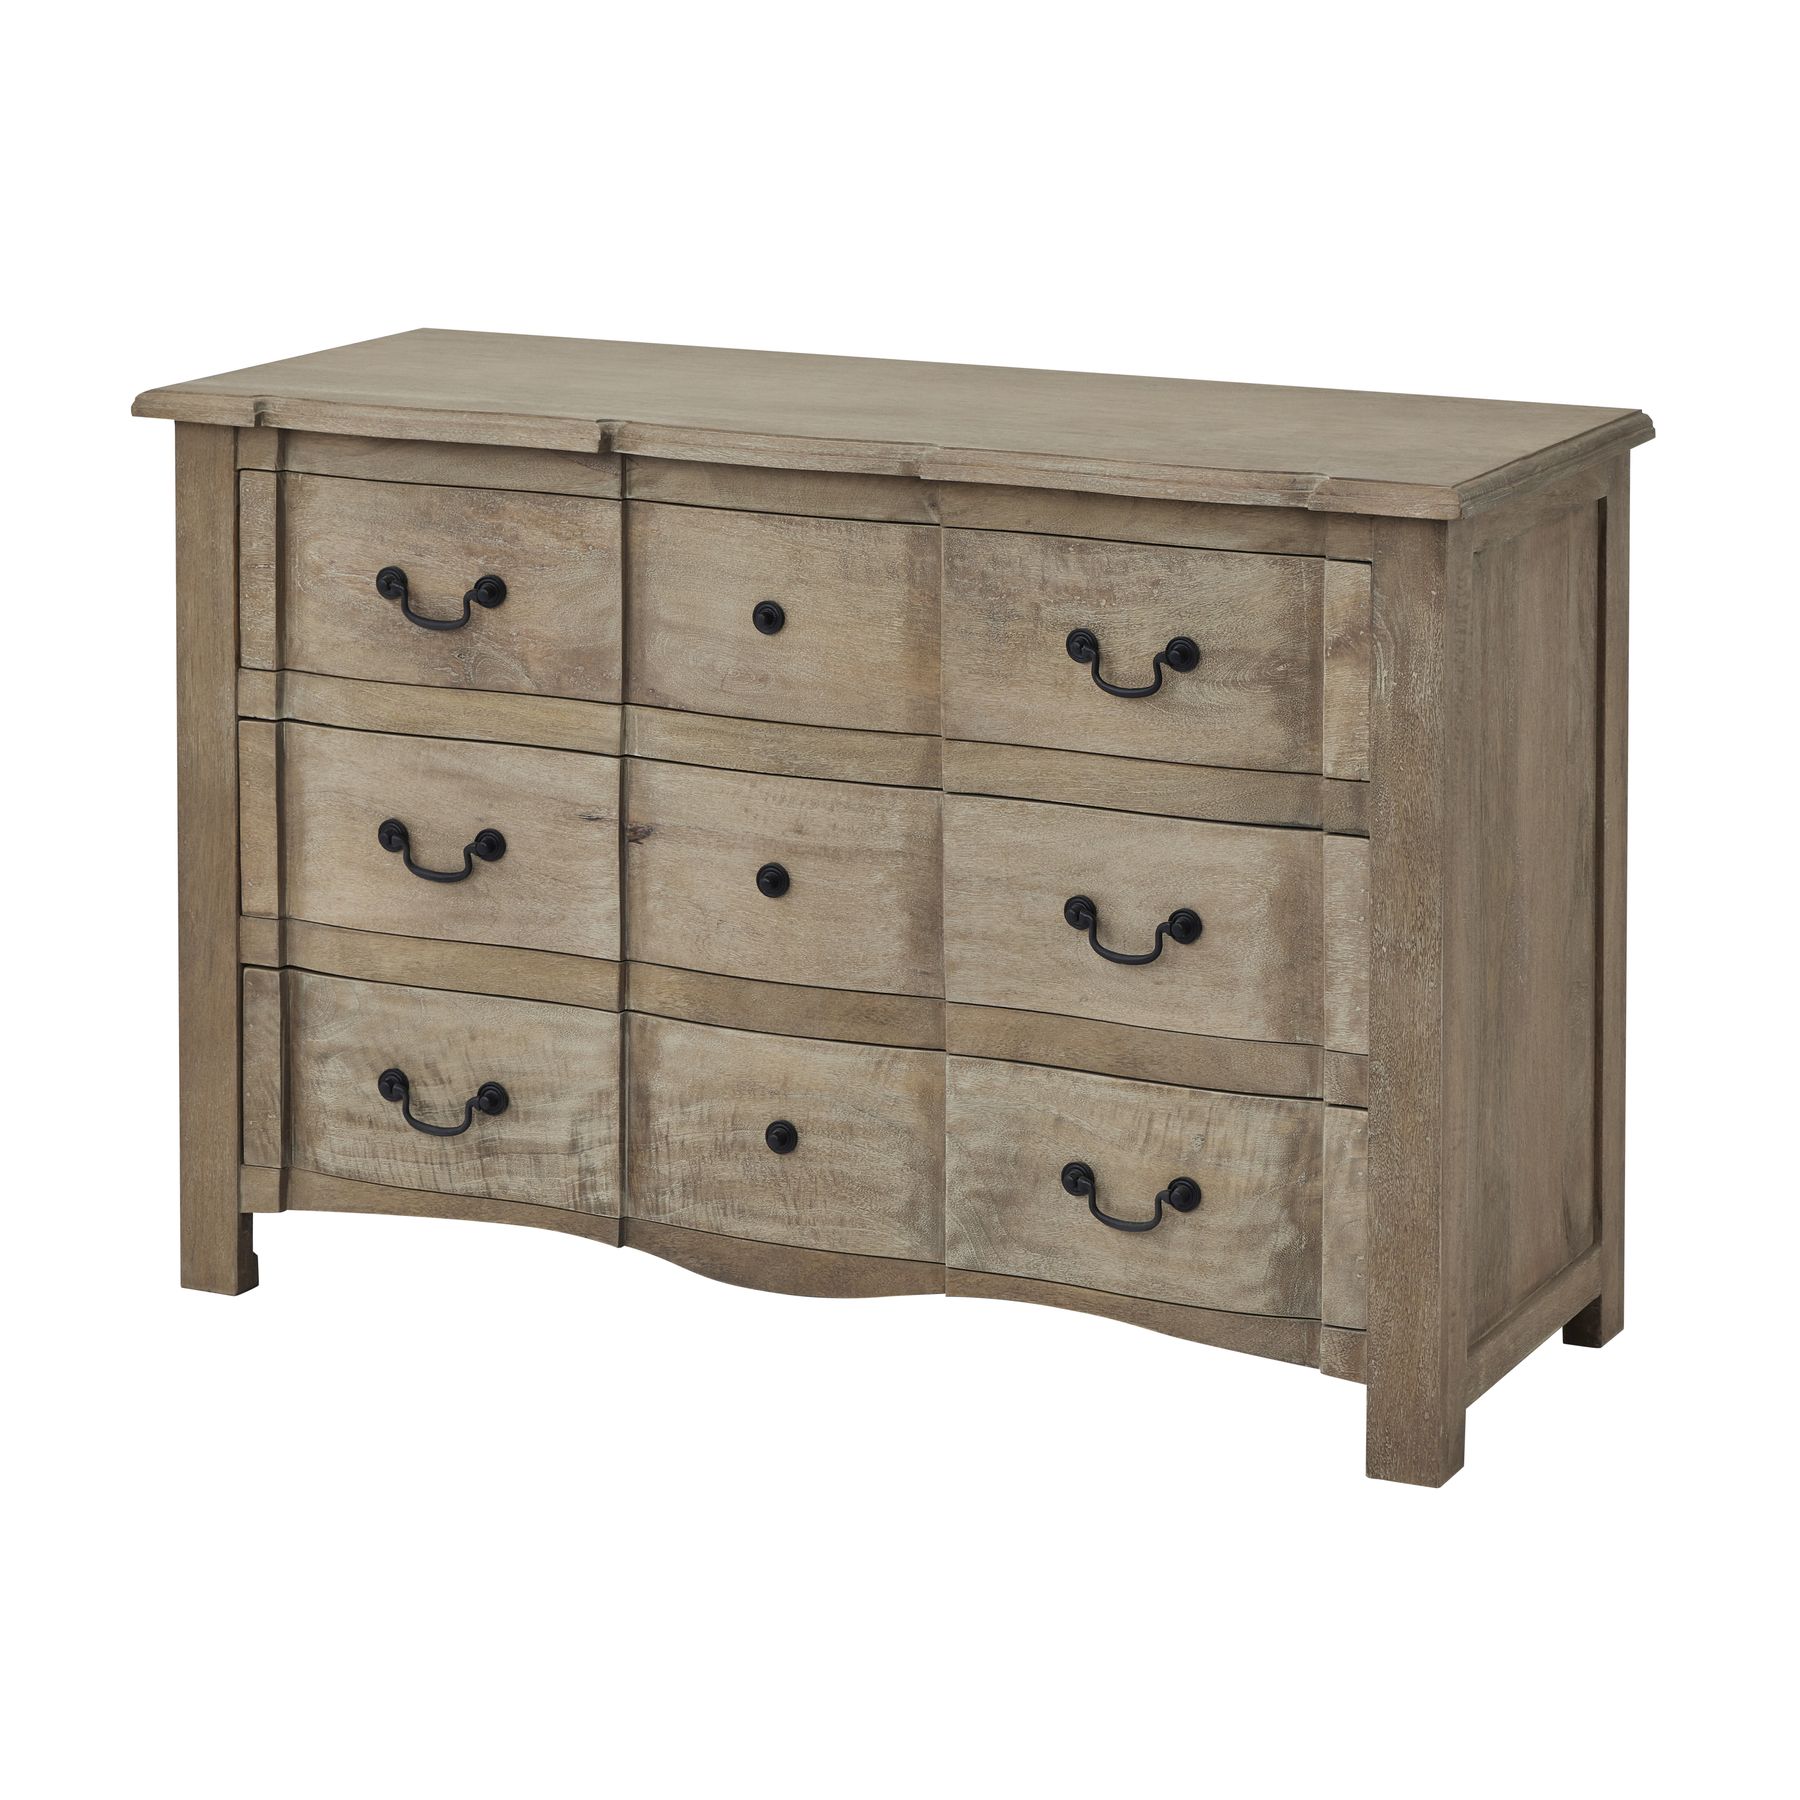 Copgrove Collection 3 Drawer Chest - Image 1